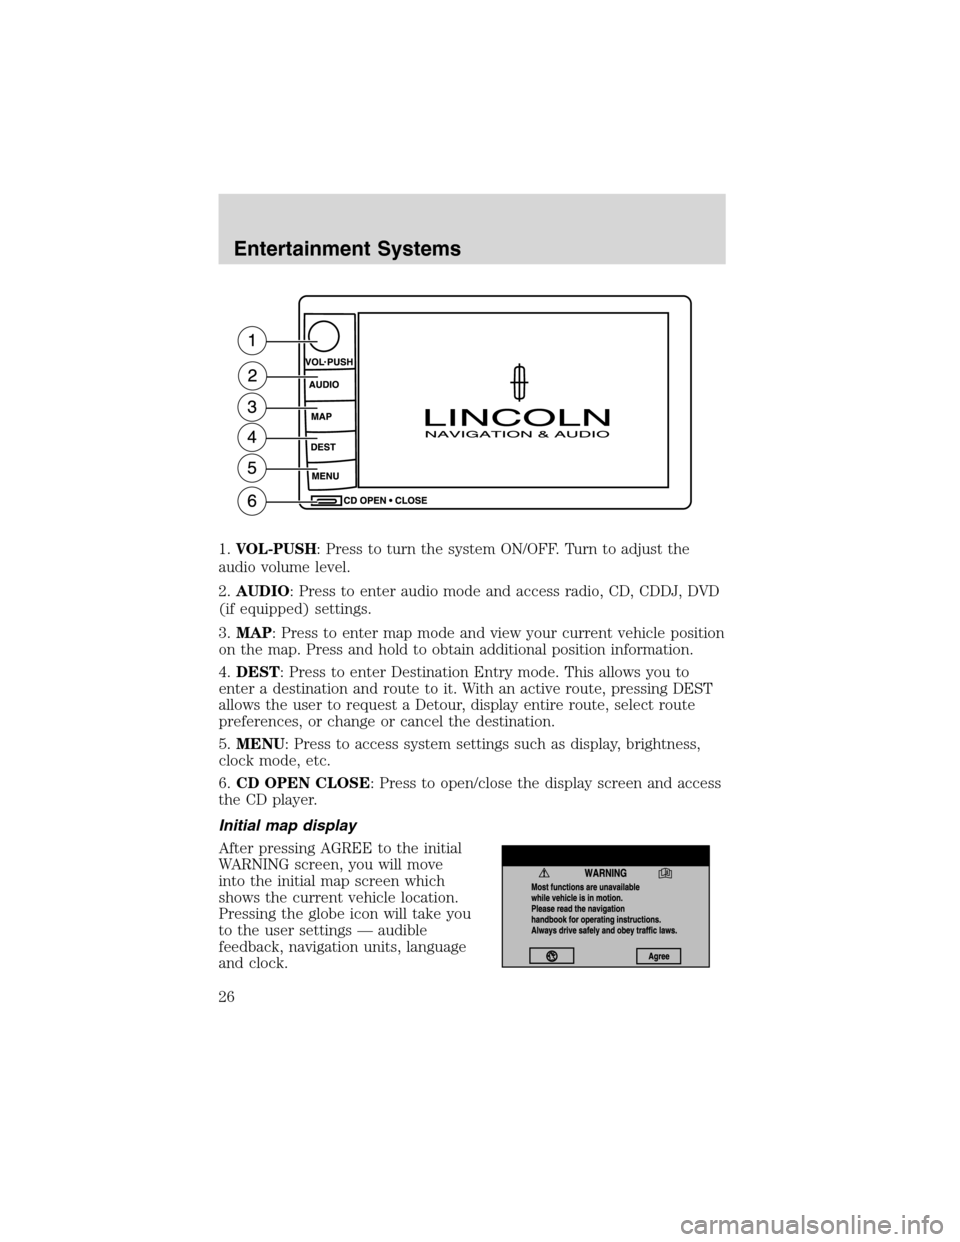 LINCOLN LS 2003  Owners Manual 1.VOL-PUSH: Press to turn the system ON/OFF. Turn to adjust the
audio volume level.
2.AUDIO: Press to enter audio mode and access radio, CD, CDDJ, DVD
(if equipped) settings.
3.MAP: Press to enter map